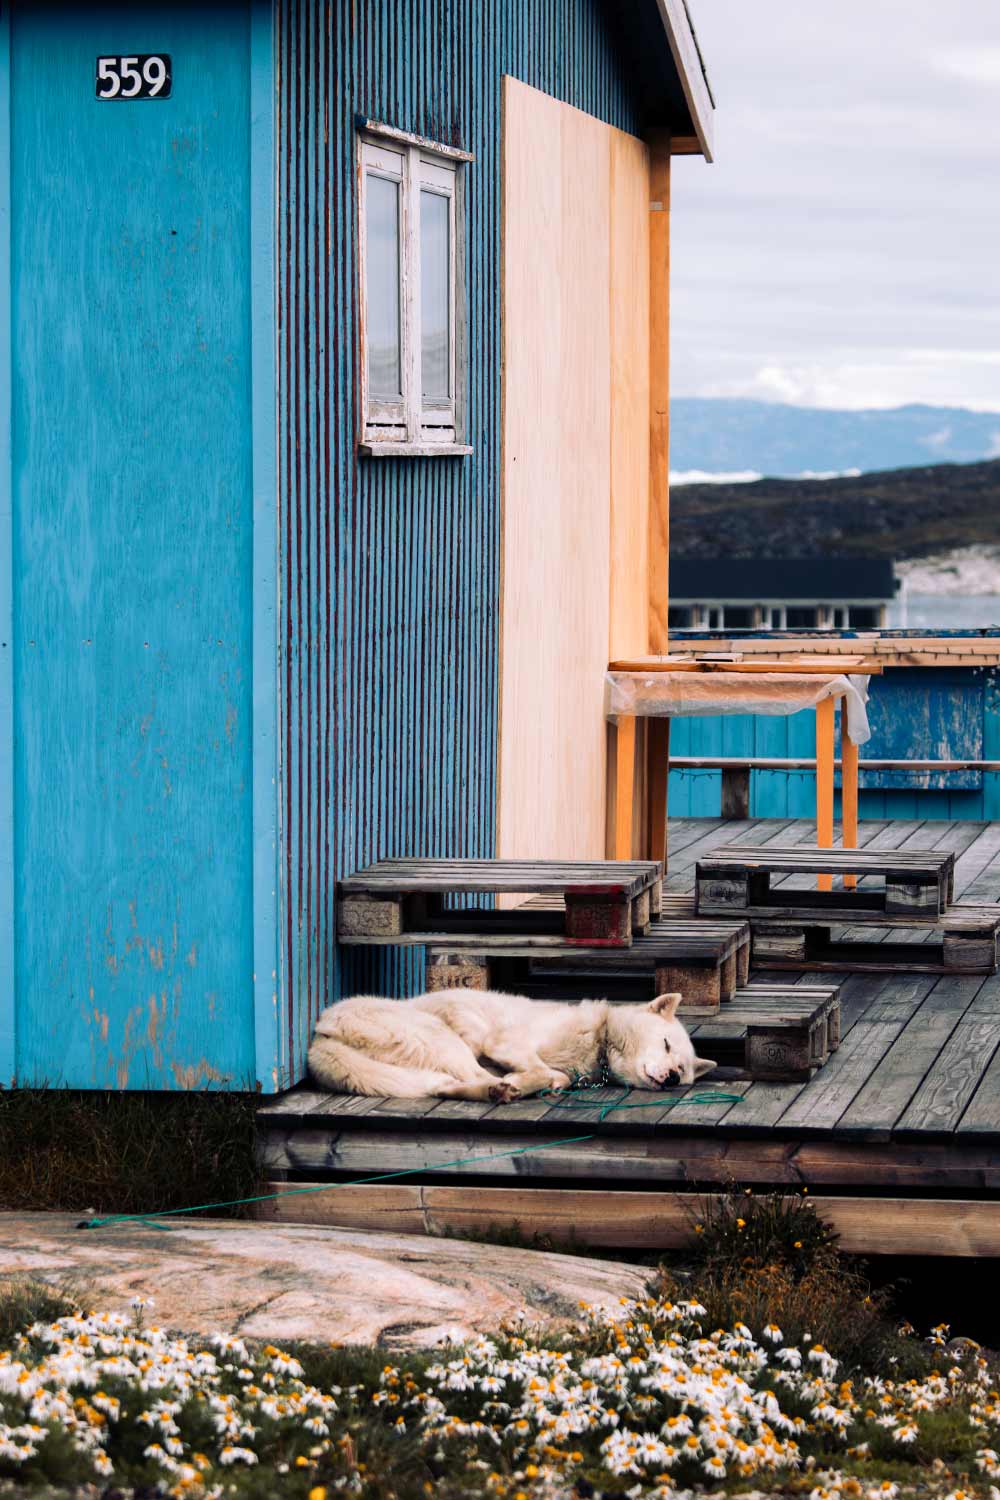 Ilulissat's sled dogs: Enchanting scenes during a 10-day summer voyage in Greenland